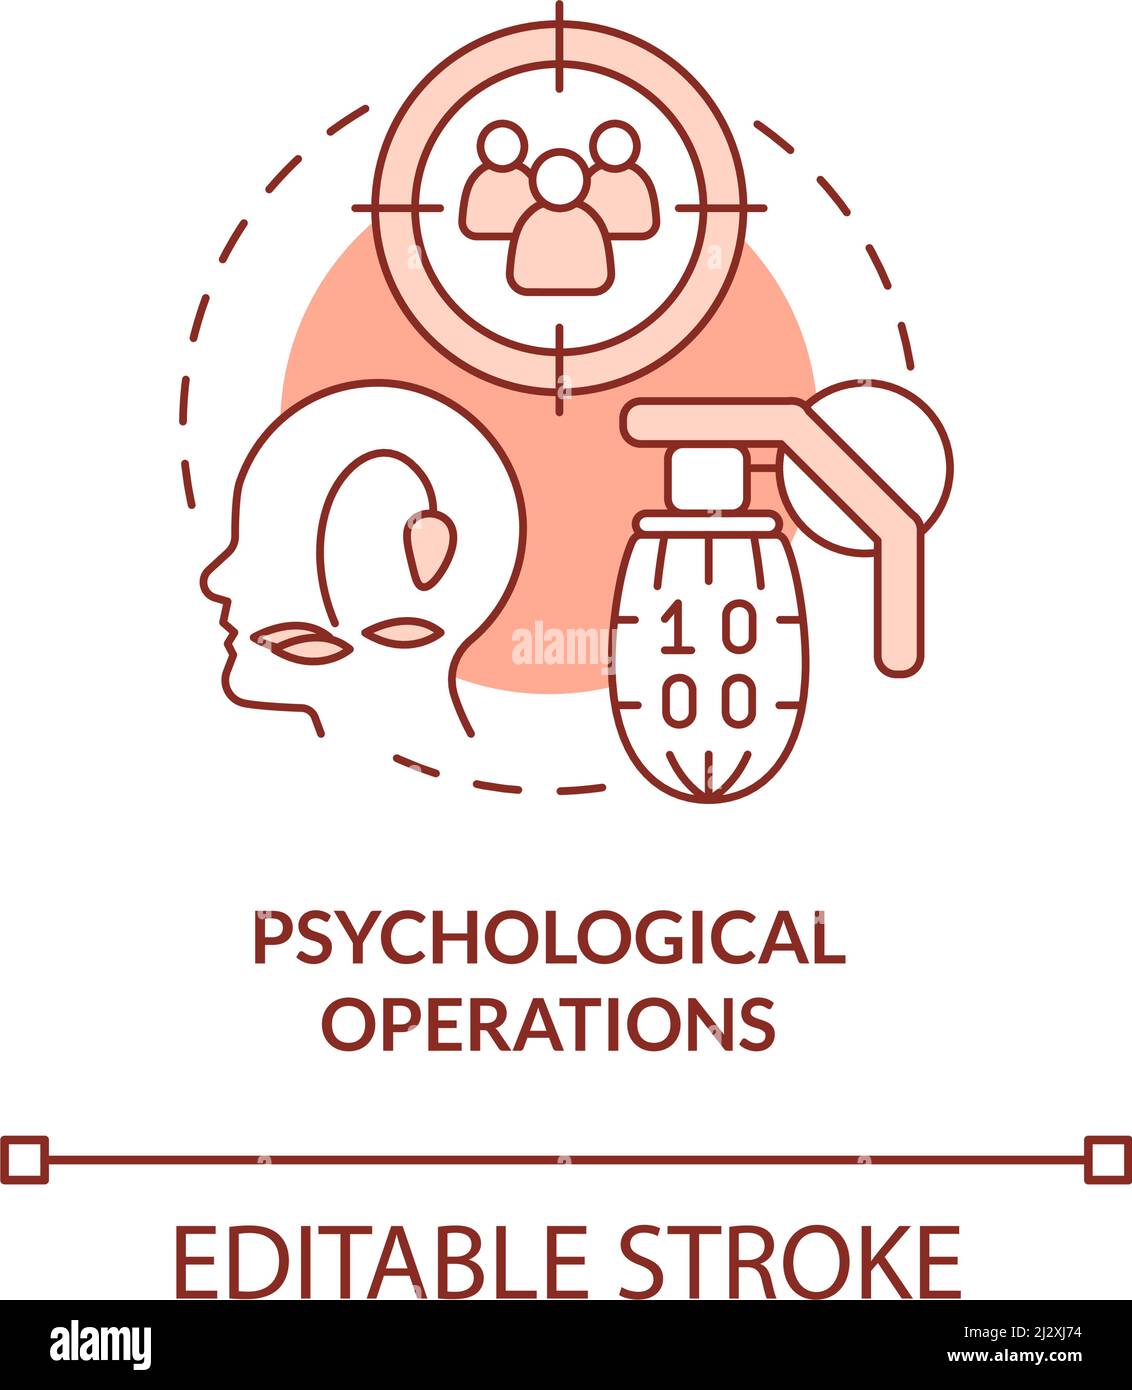 Psychological operations red concept icon Stock Vector